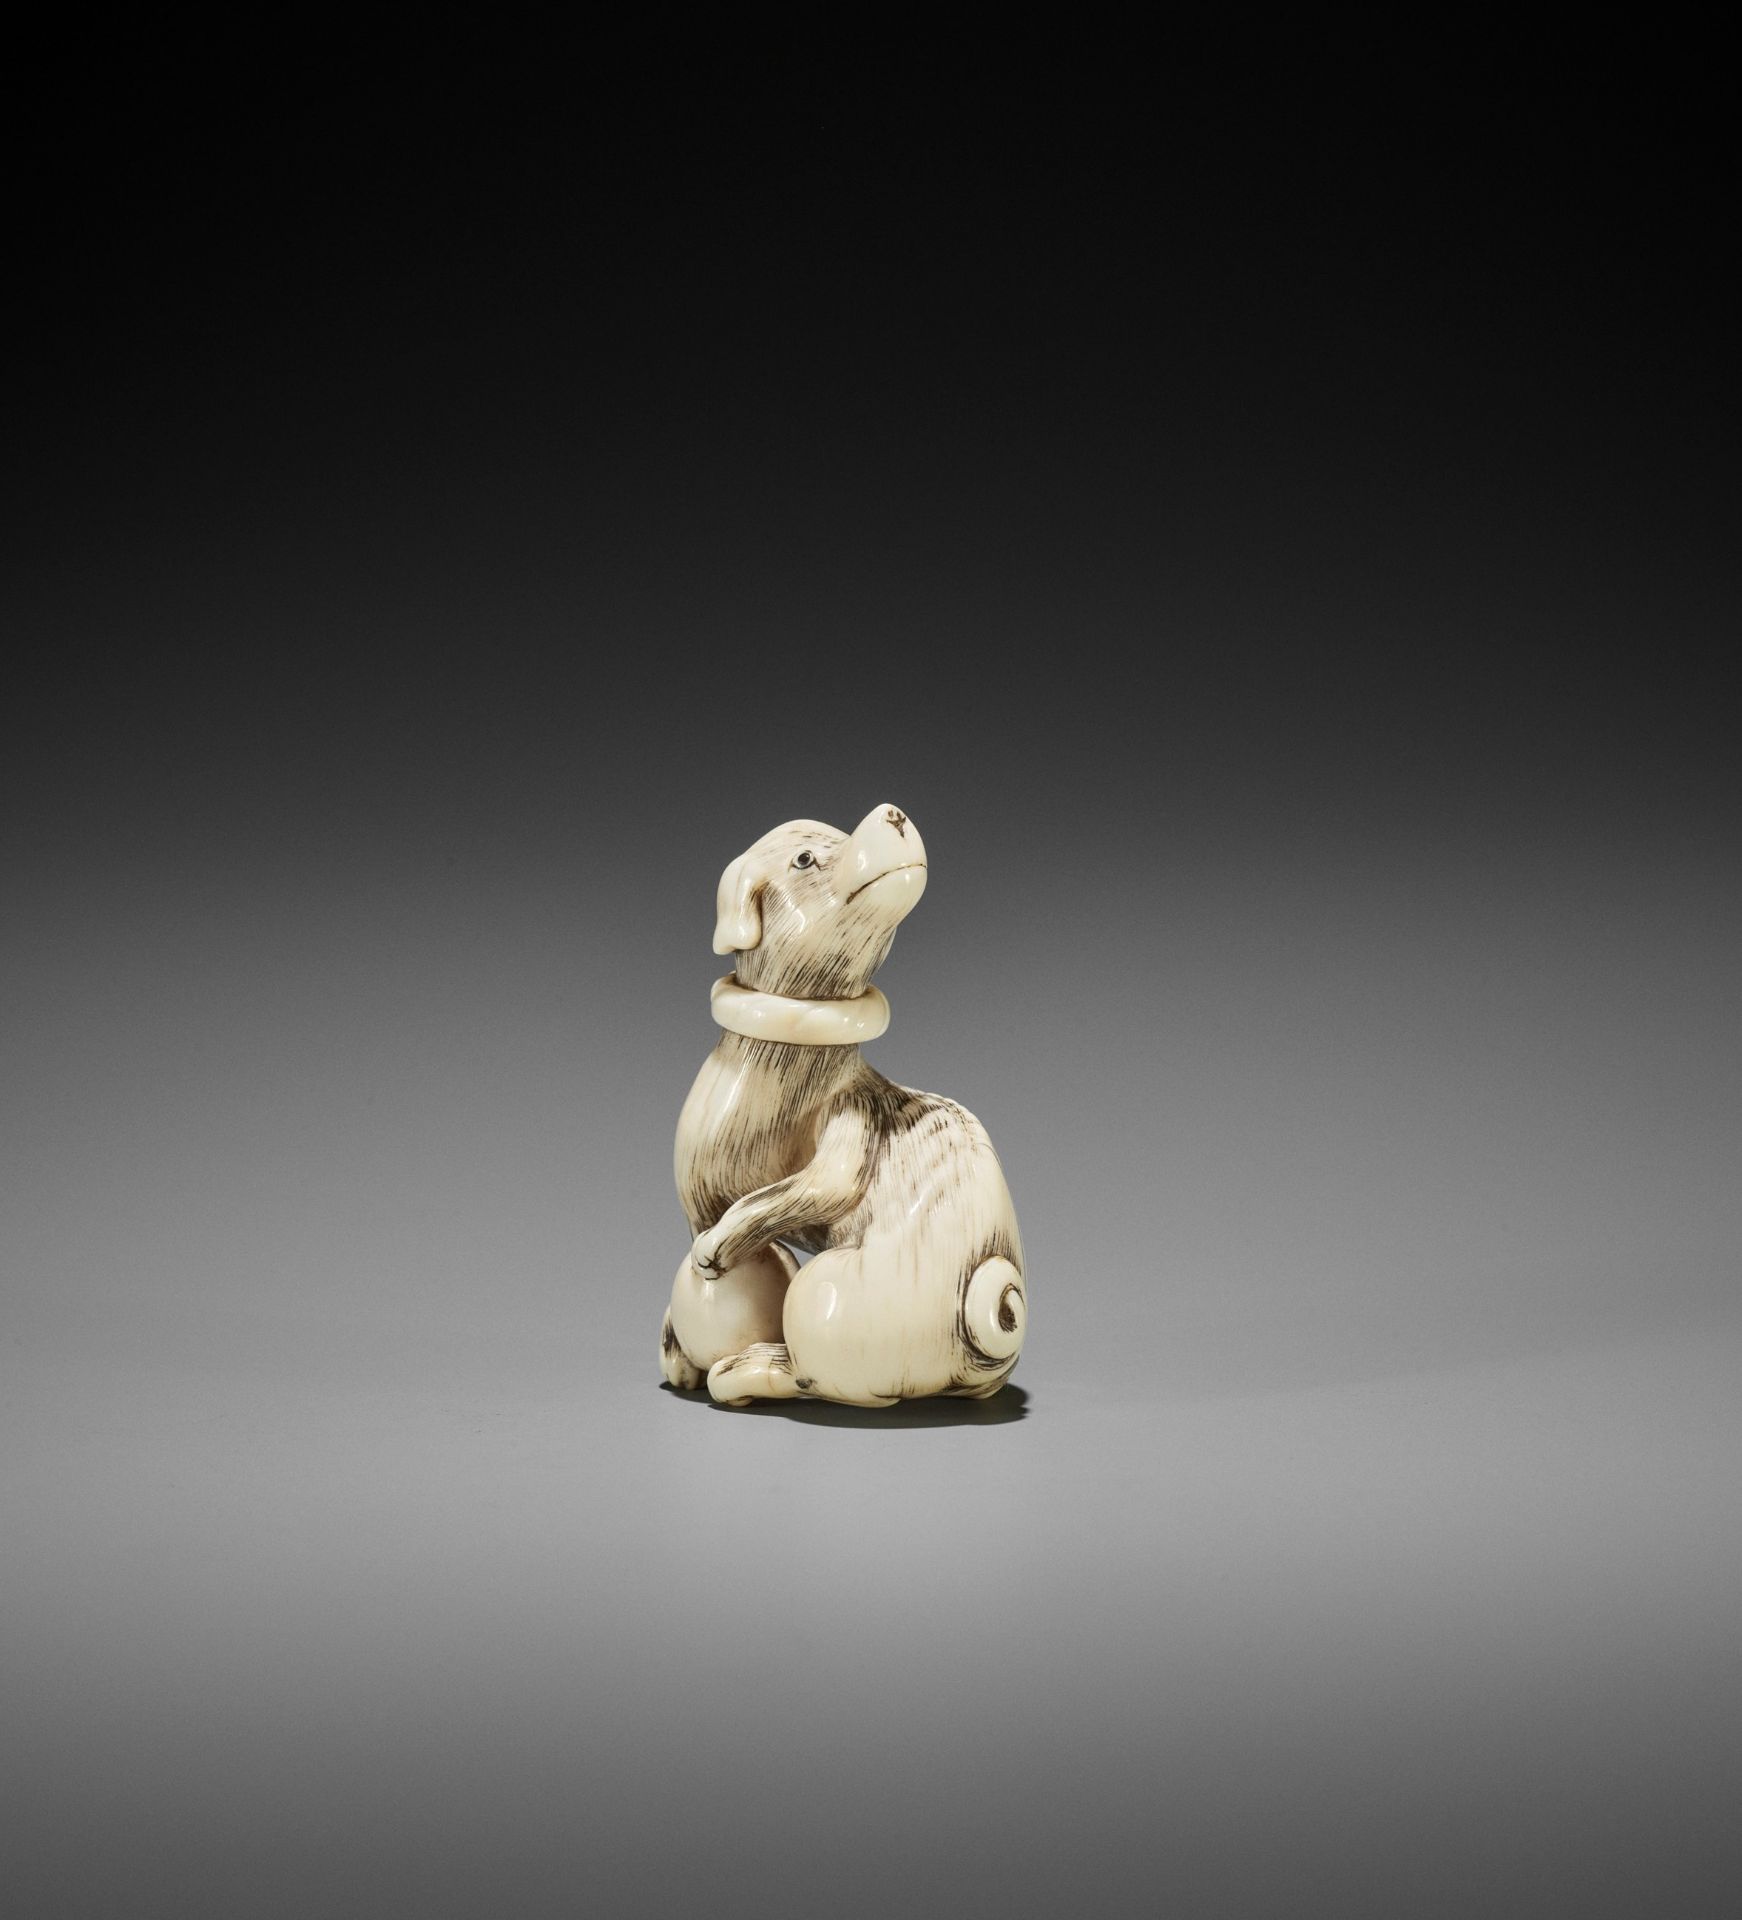 AN IVORY NETSUKE OF A DOG WITH BALL, ATTRIBUTED TO MITSUHARU